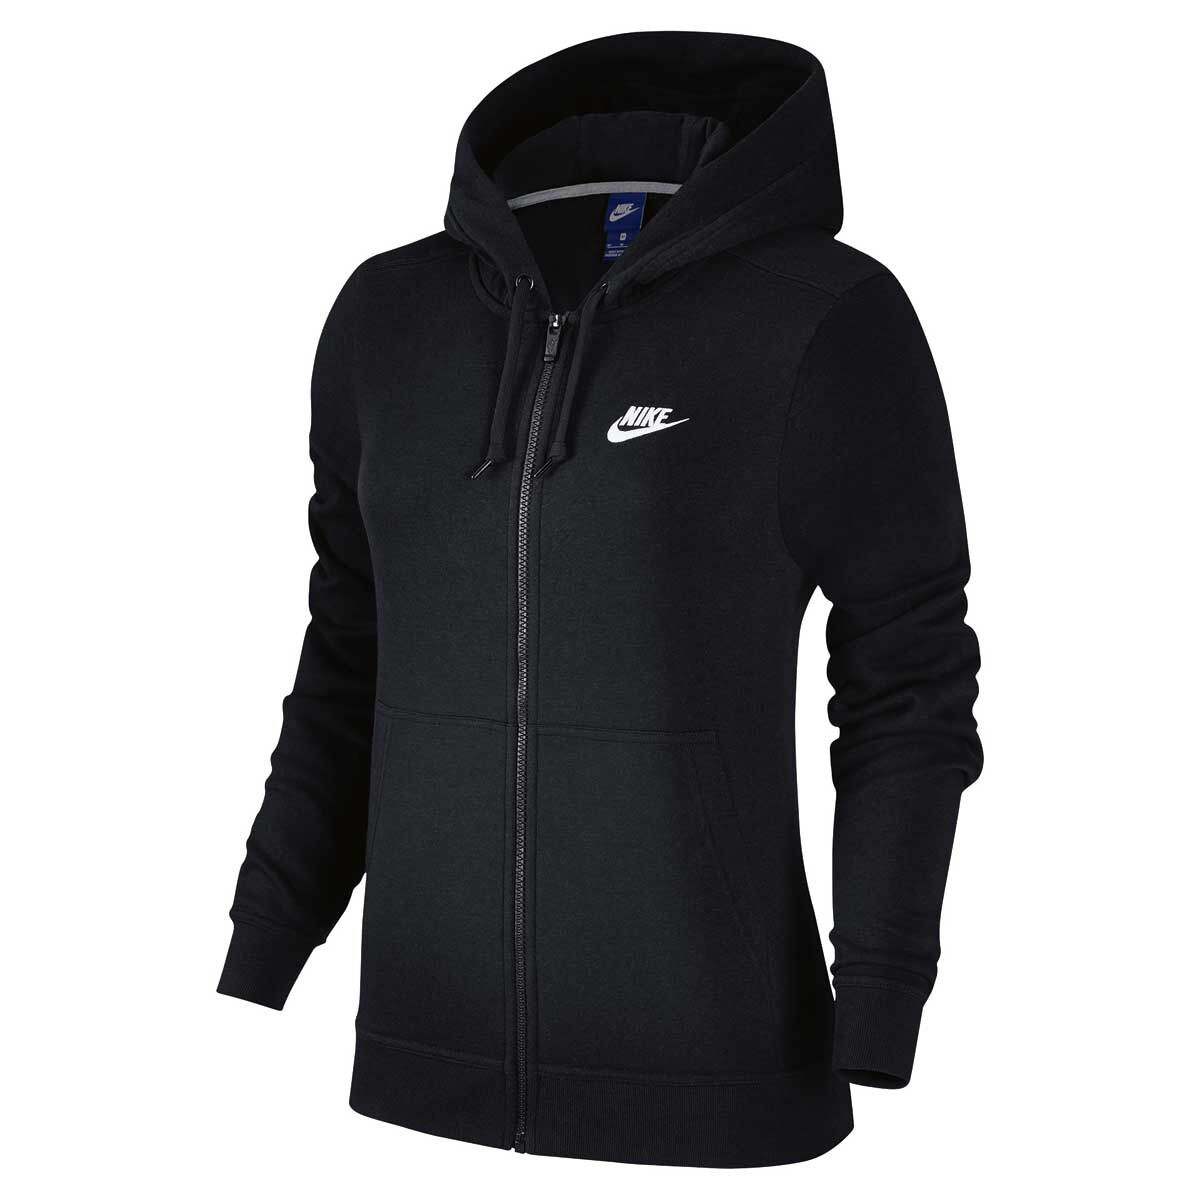 Bridal ethically nike womens sportswear fleece hoodie teal com from, Women's one piece swimsuits with underwire, long sleeve knee length cocktail dresses. 